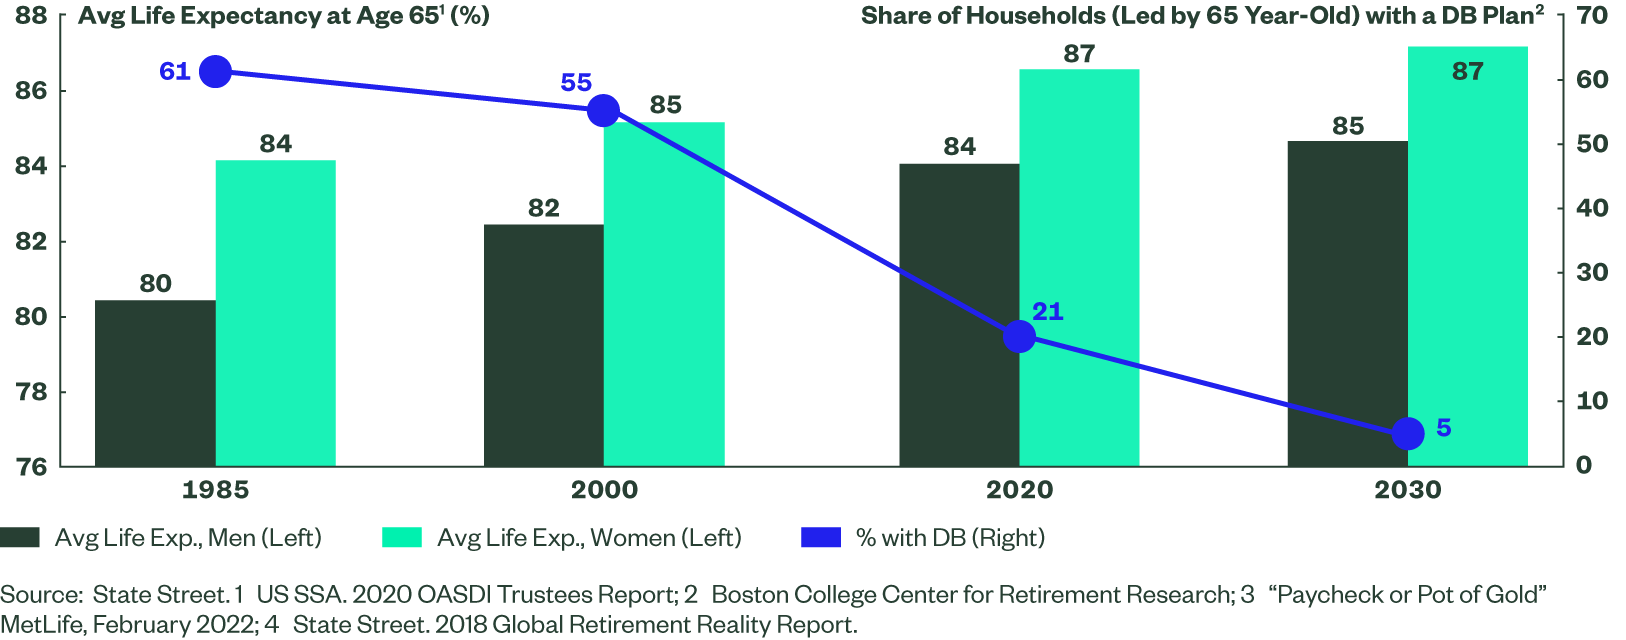 Figure 1: Increasing Need for Income Solutions Given Decline of DB Plans and Longer Life Expectancies